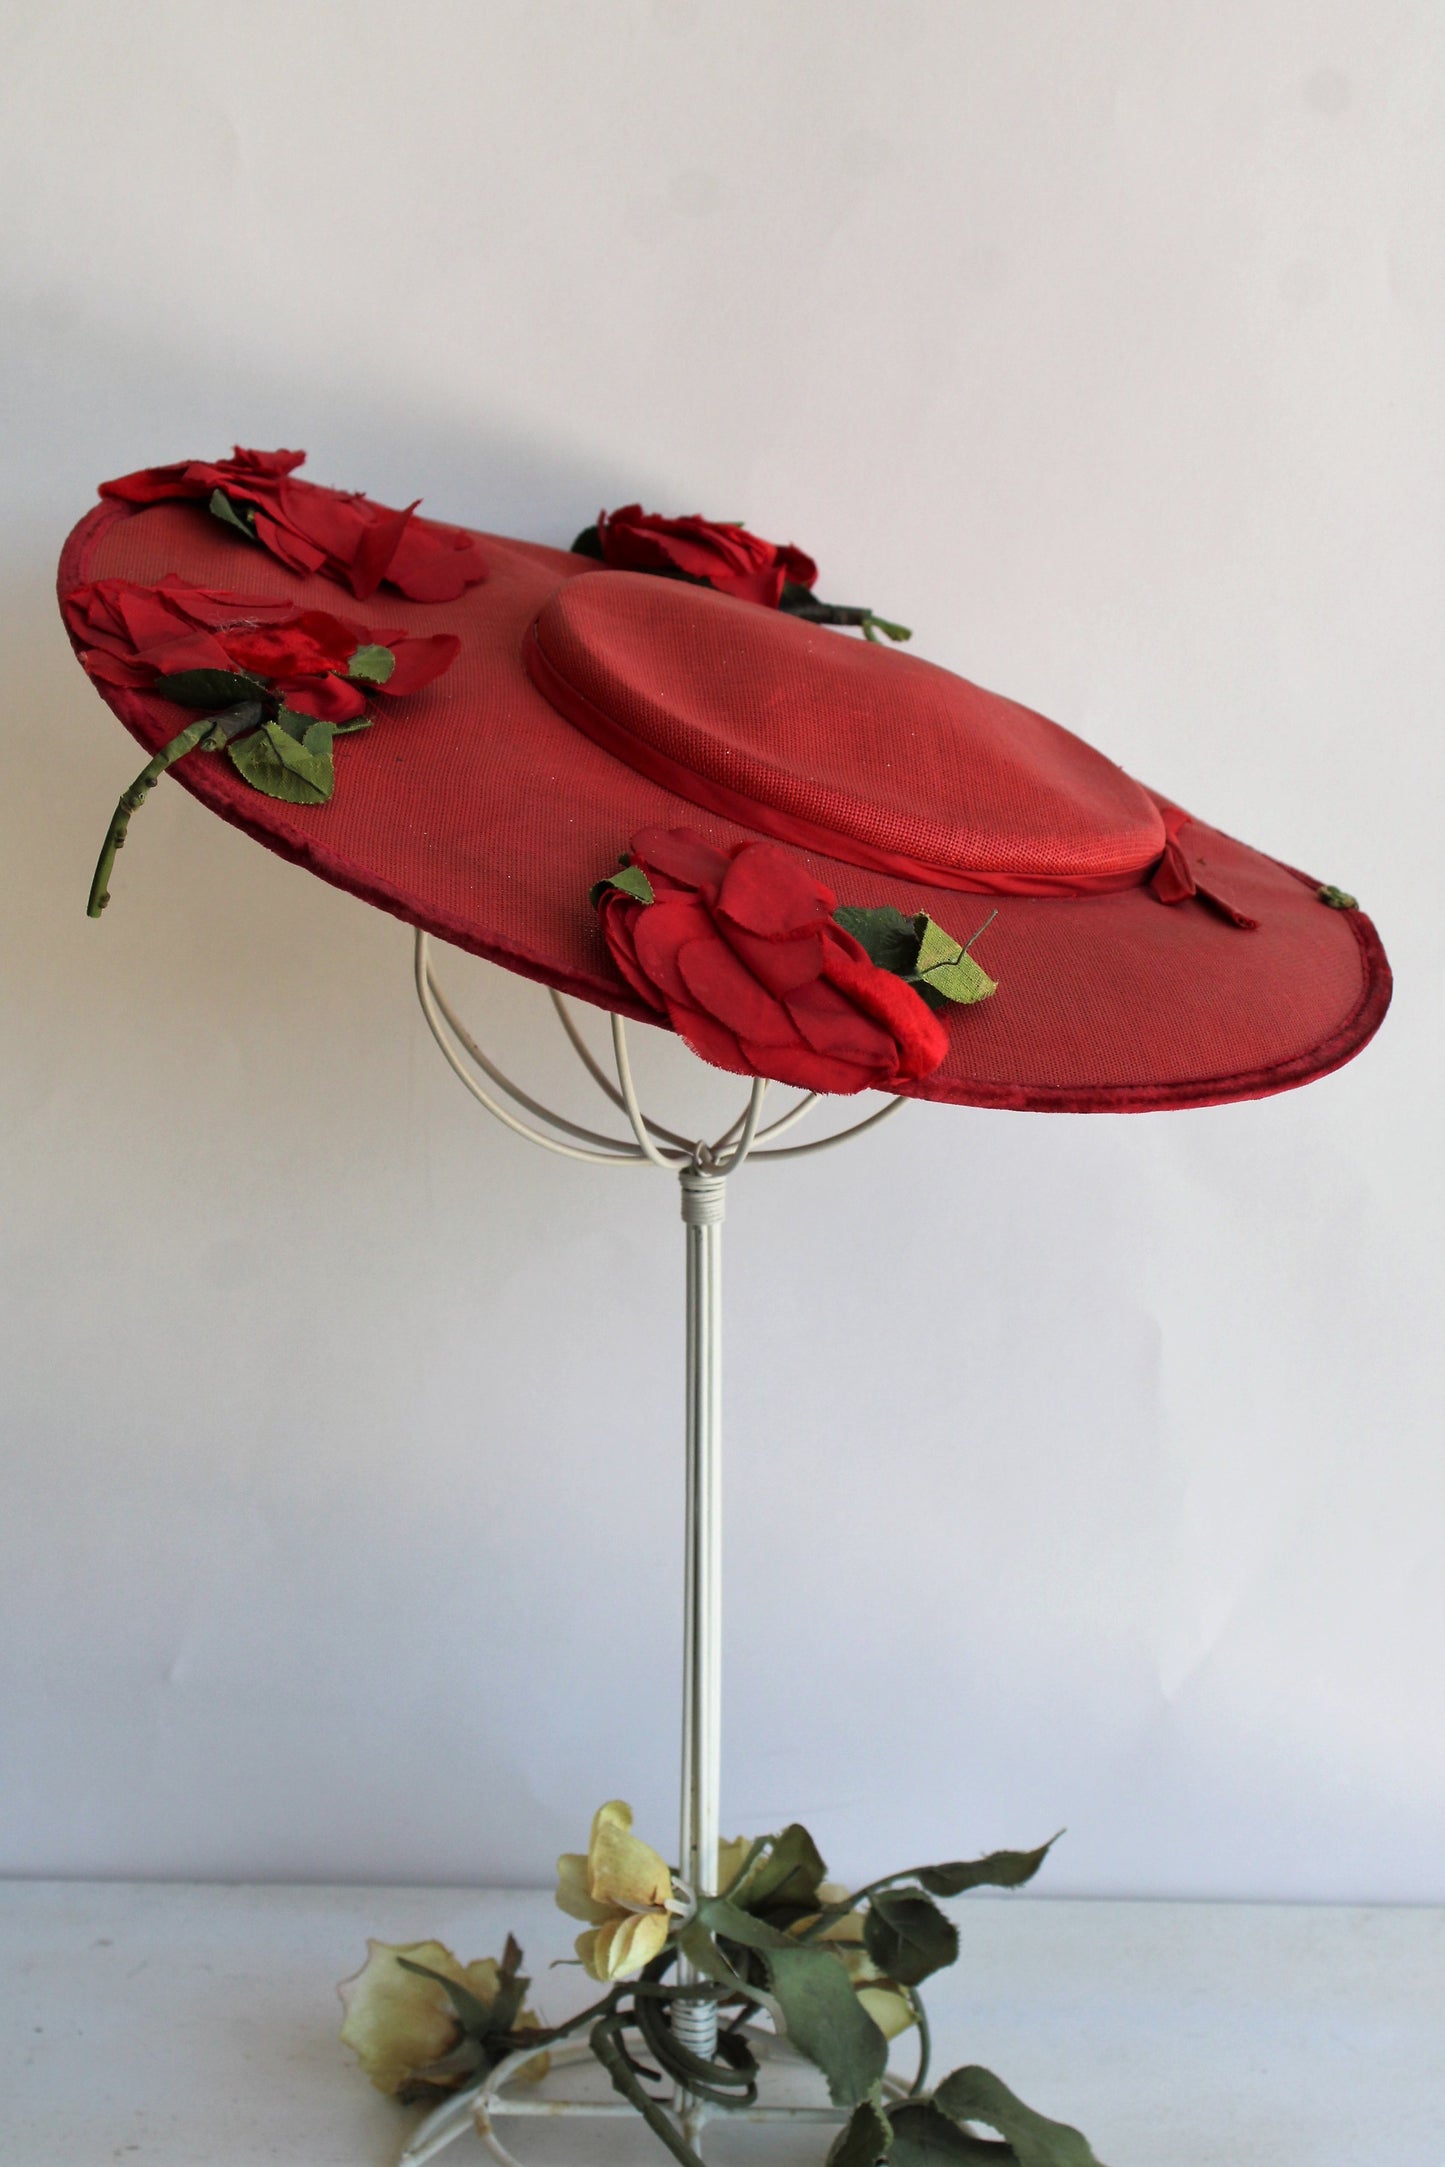 Vintage 1950s Red Straw Wide Brimmed Hat with Velvet and Silk Flowers